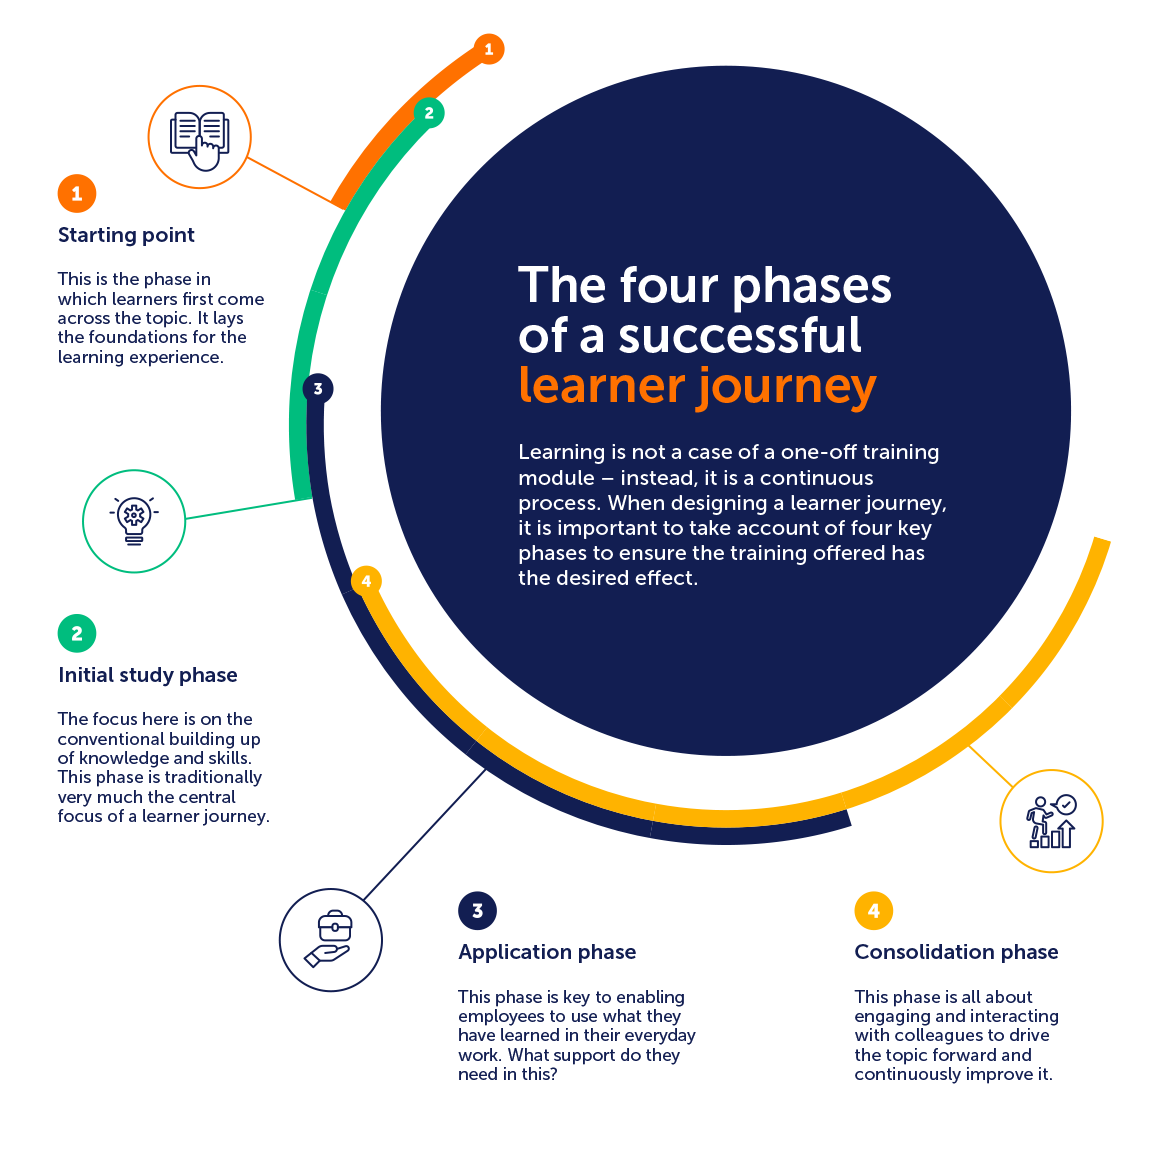 The four phases of a successful learner journey